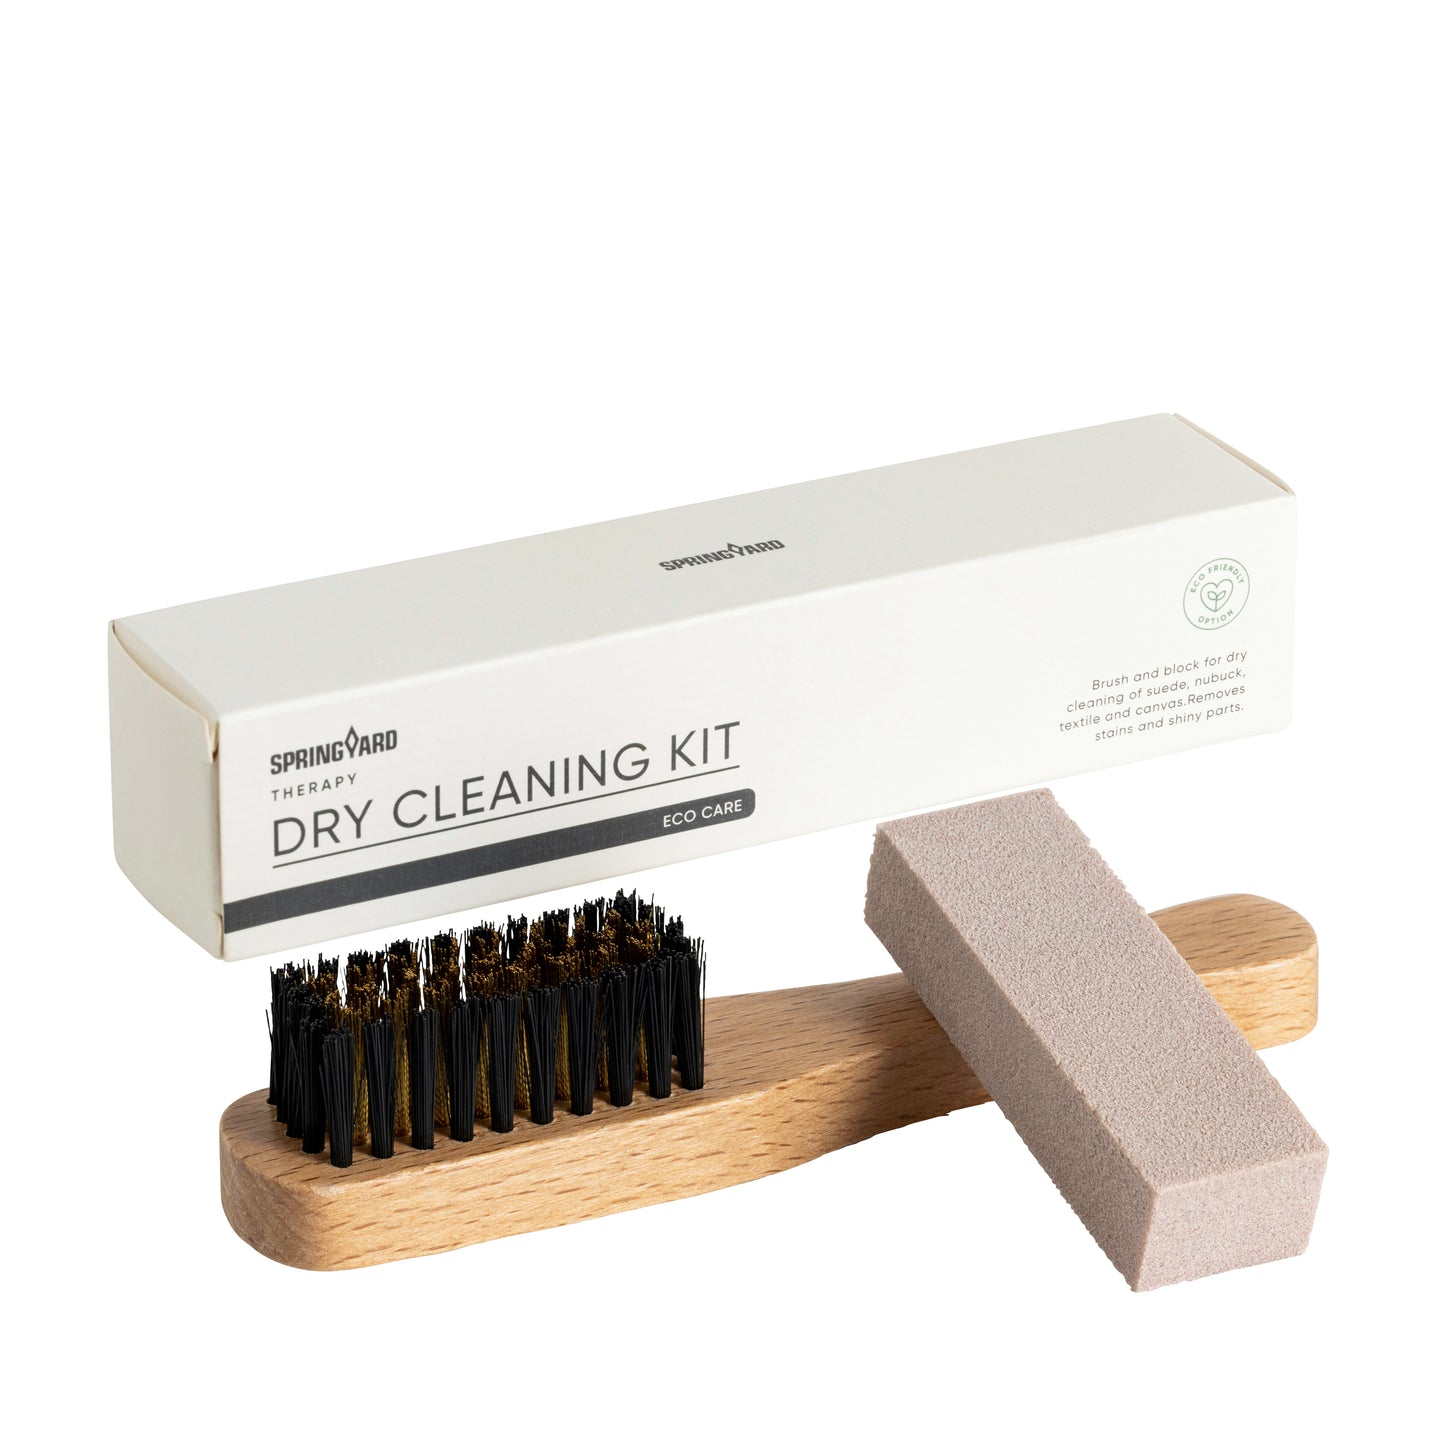 SPRING YARD Dry Cleaning Kit